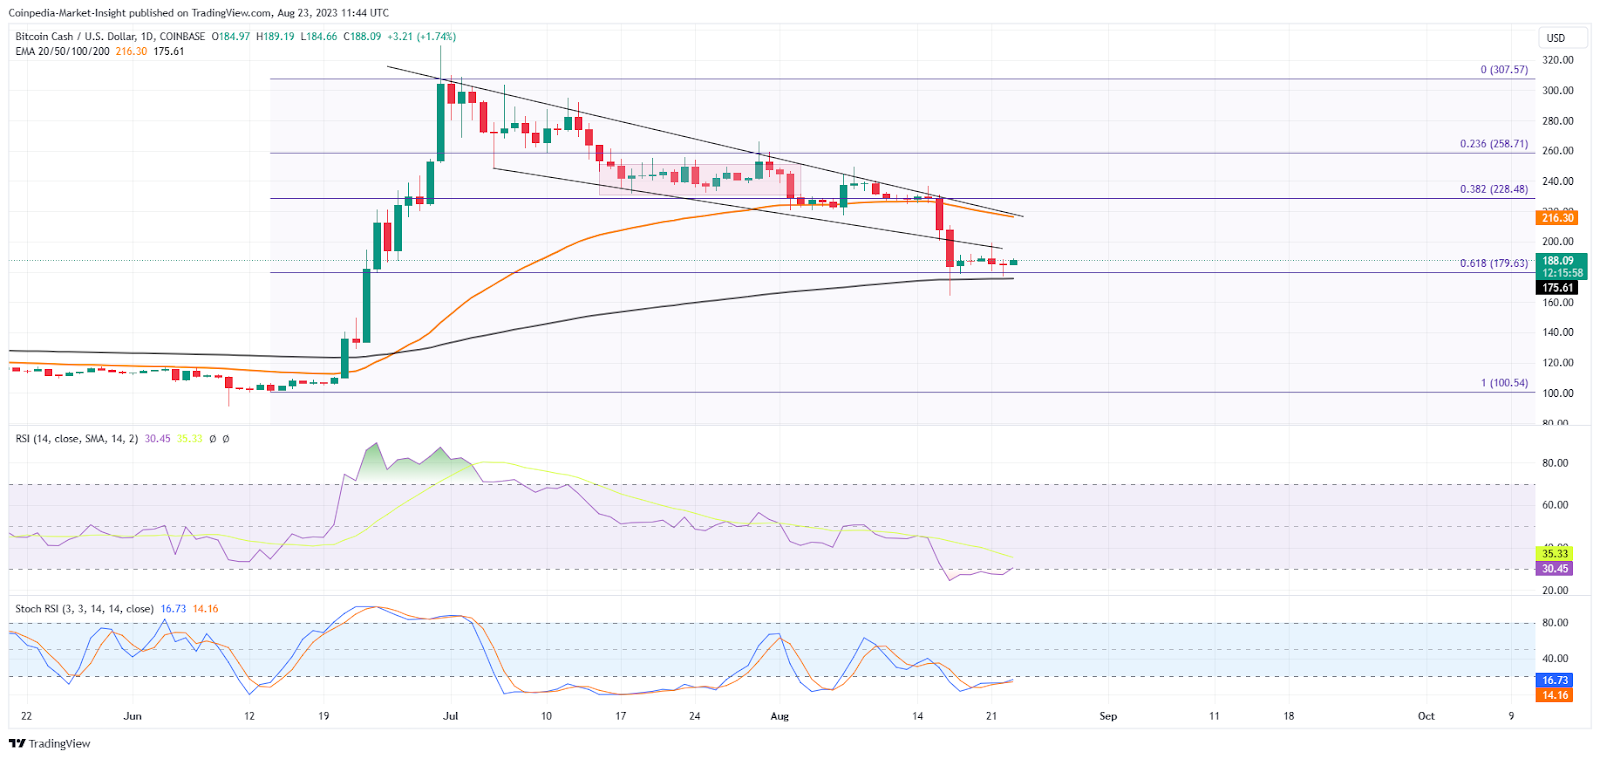 Bitcoin Cash Price Today | BCH Price Prediction, Live Chart and News Forecast - CoinGape